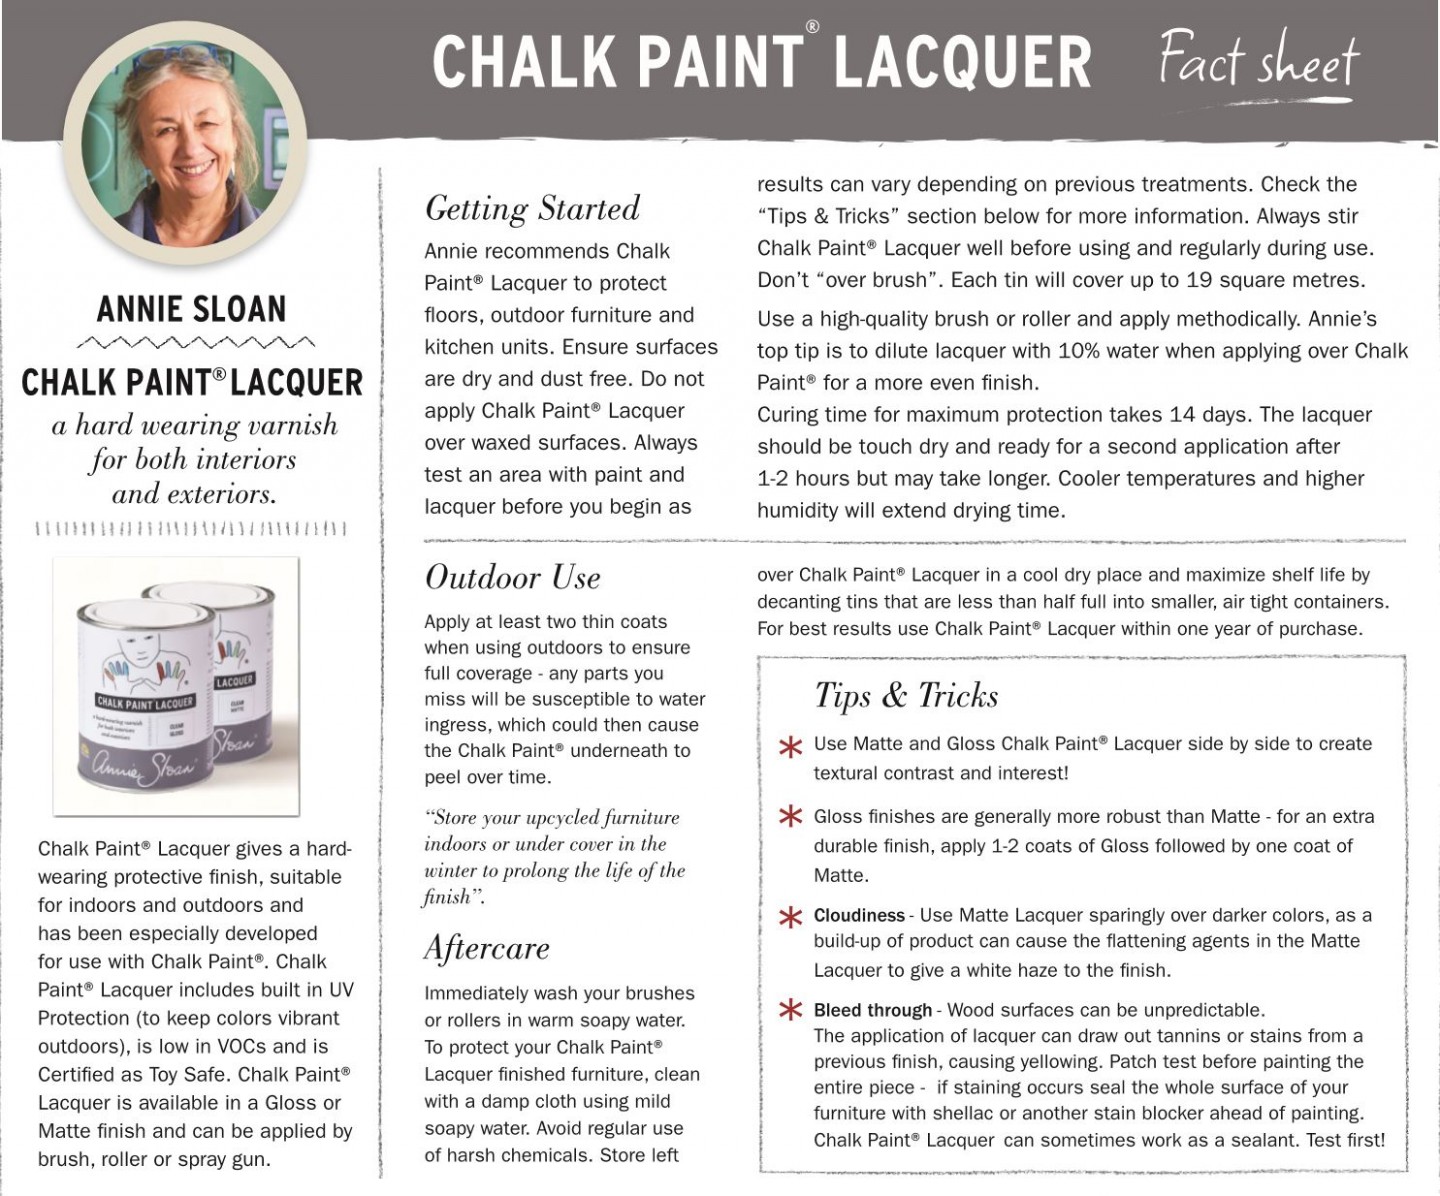 Annie Sloan Lacquer Matte Finish 9ml (interior And Exterior Use) Painting Over Chalk Paint That Has Been Waxed